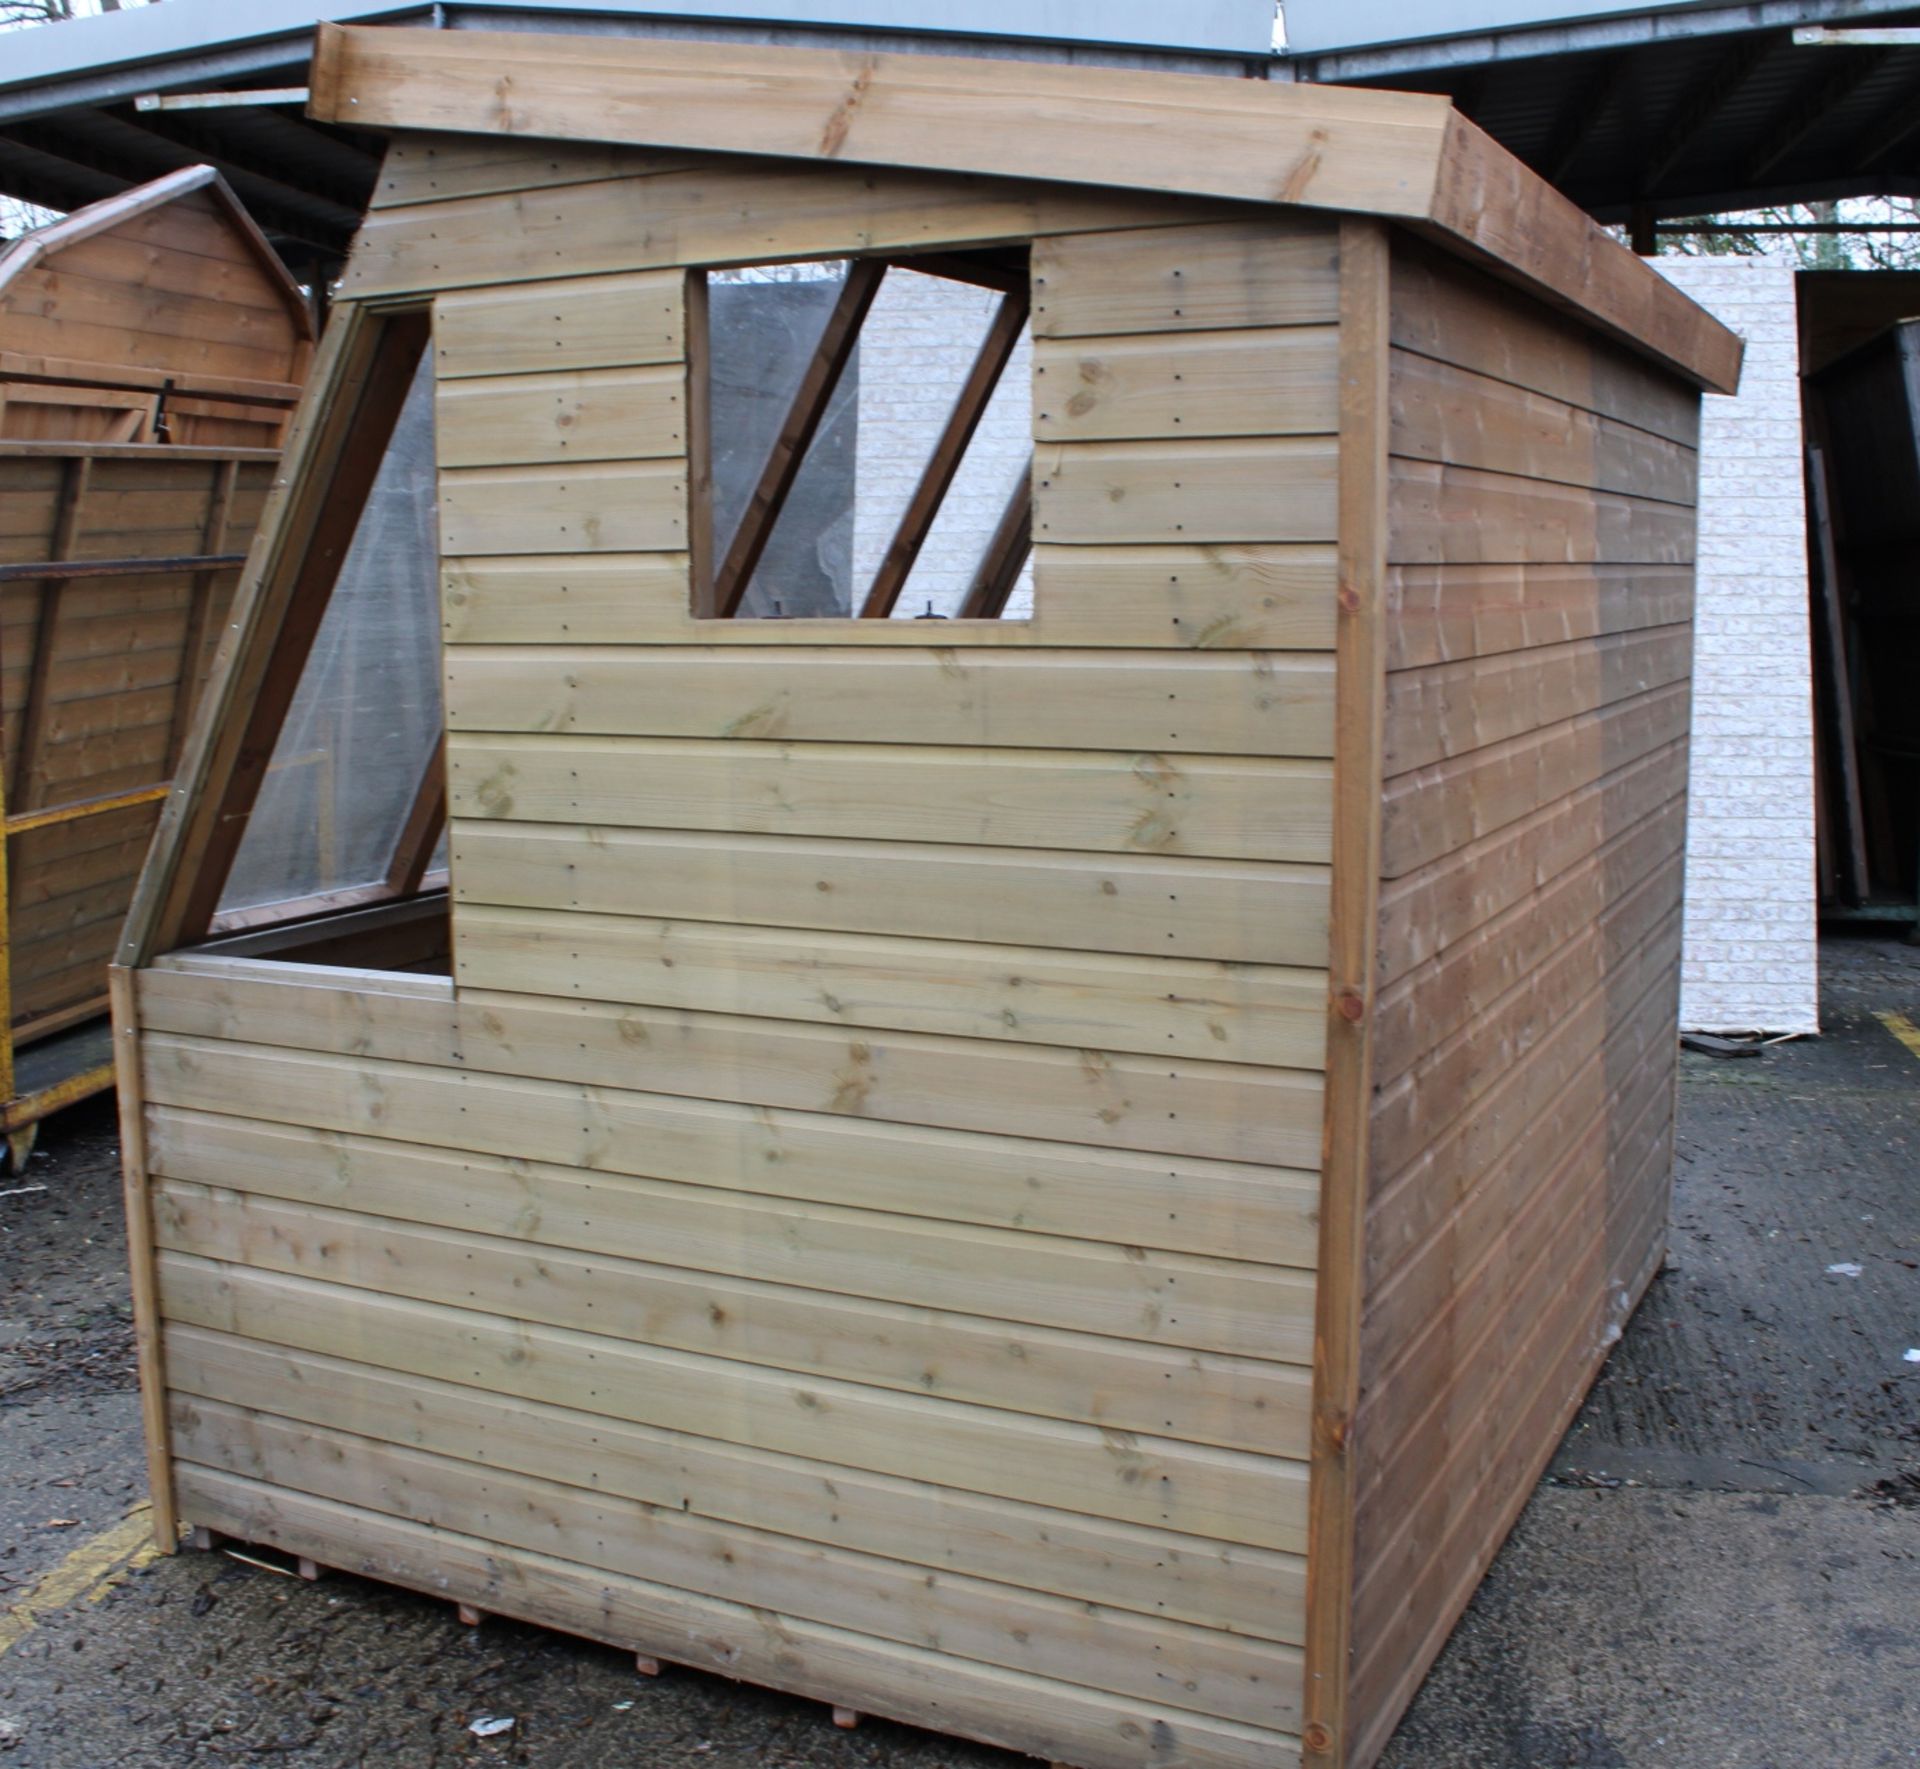 8x6 Exdisplay potting shed, Standard 16mm Nominal Cladding RRP£1,500 - Image 3 of 6